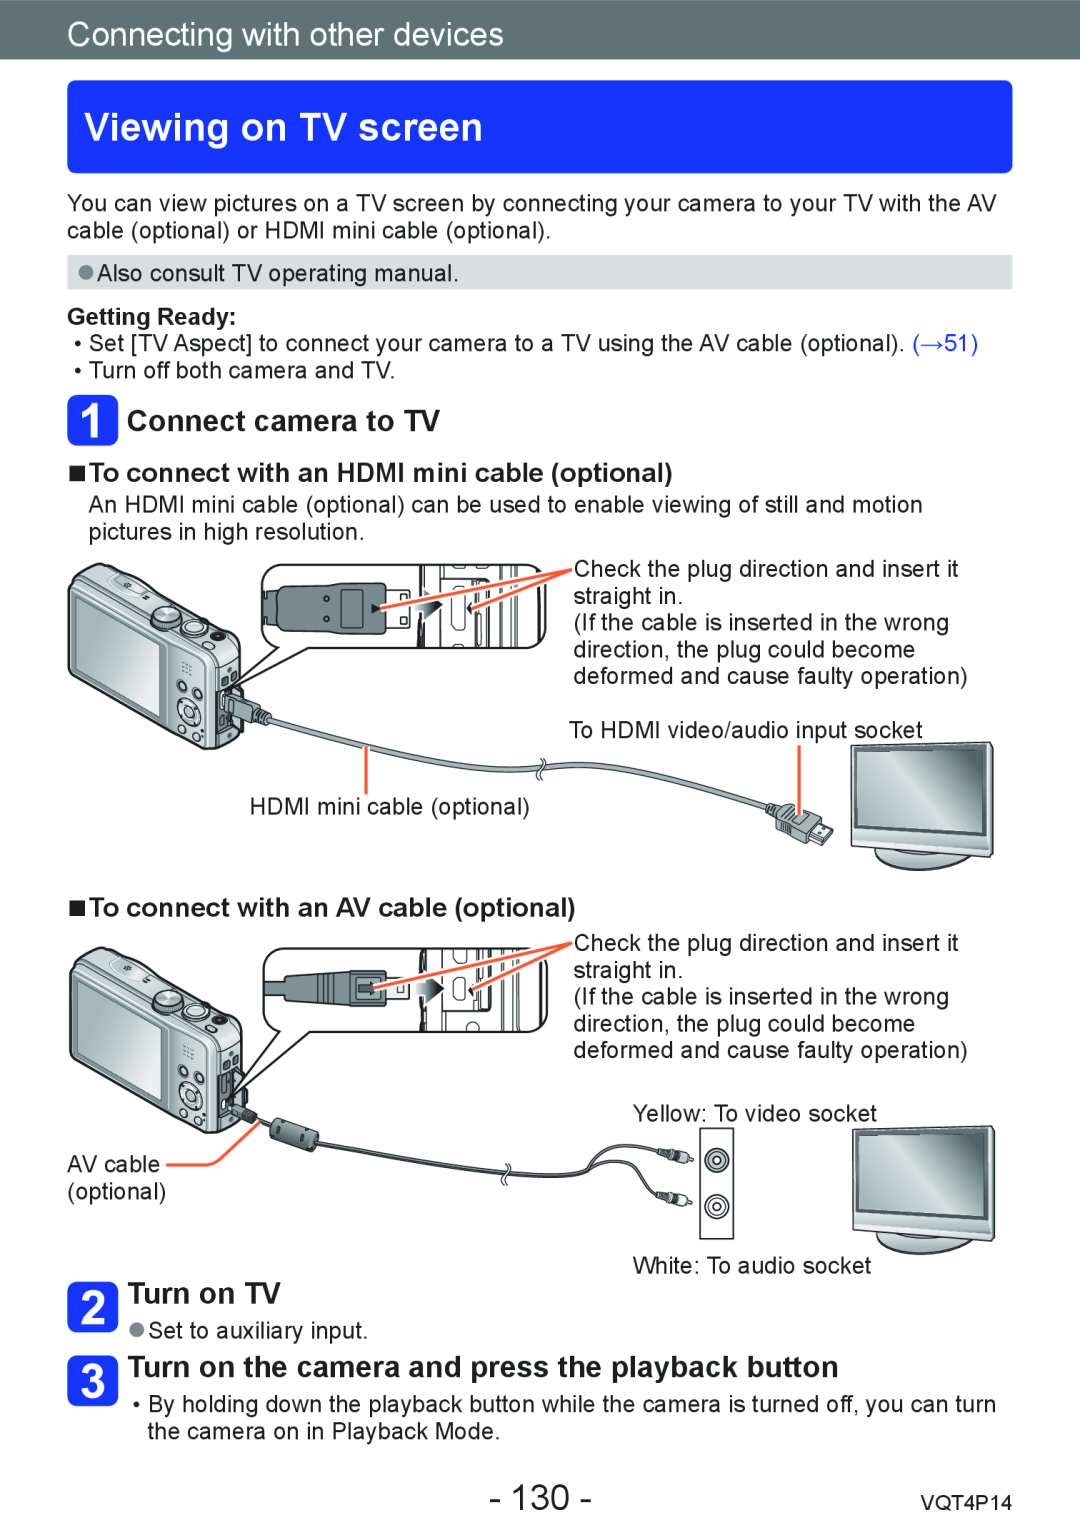 Panasonic DMC-ZS25 Viewing on TV screen, Connecting with other devices, Connect camera to TV, Turn on TV, Getting Ready 